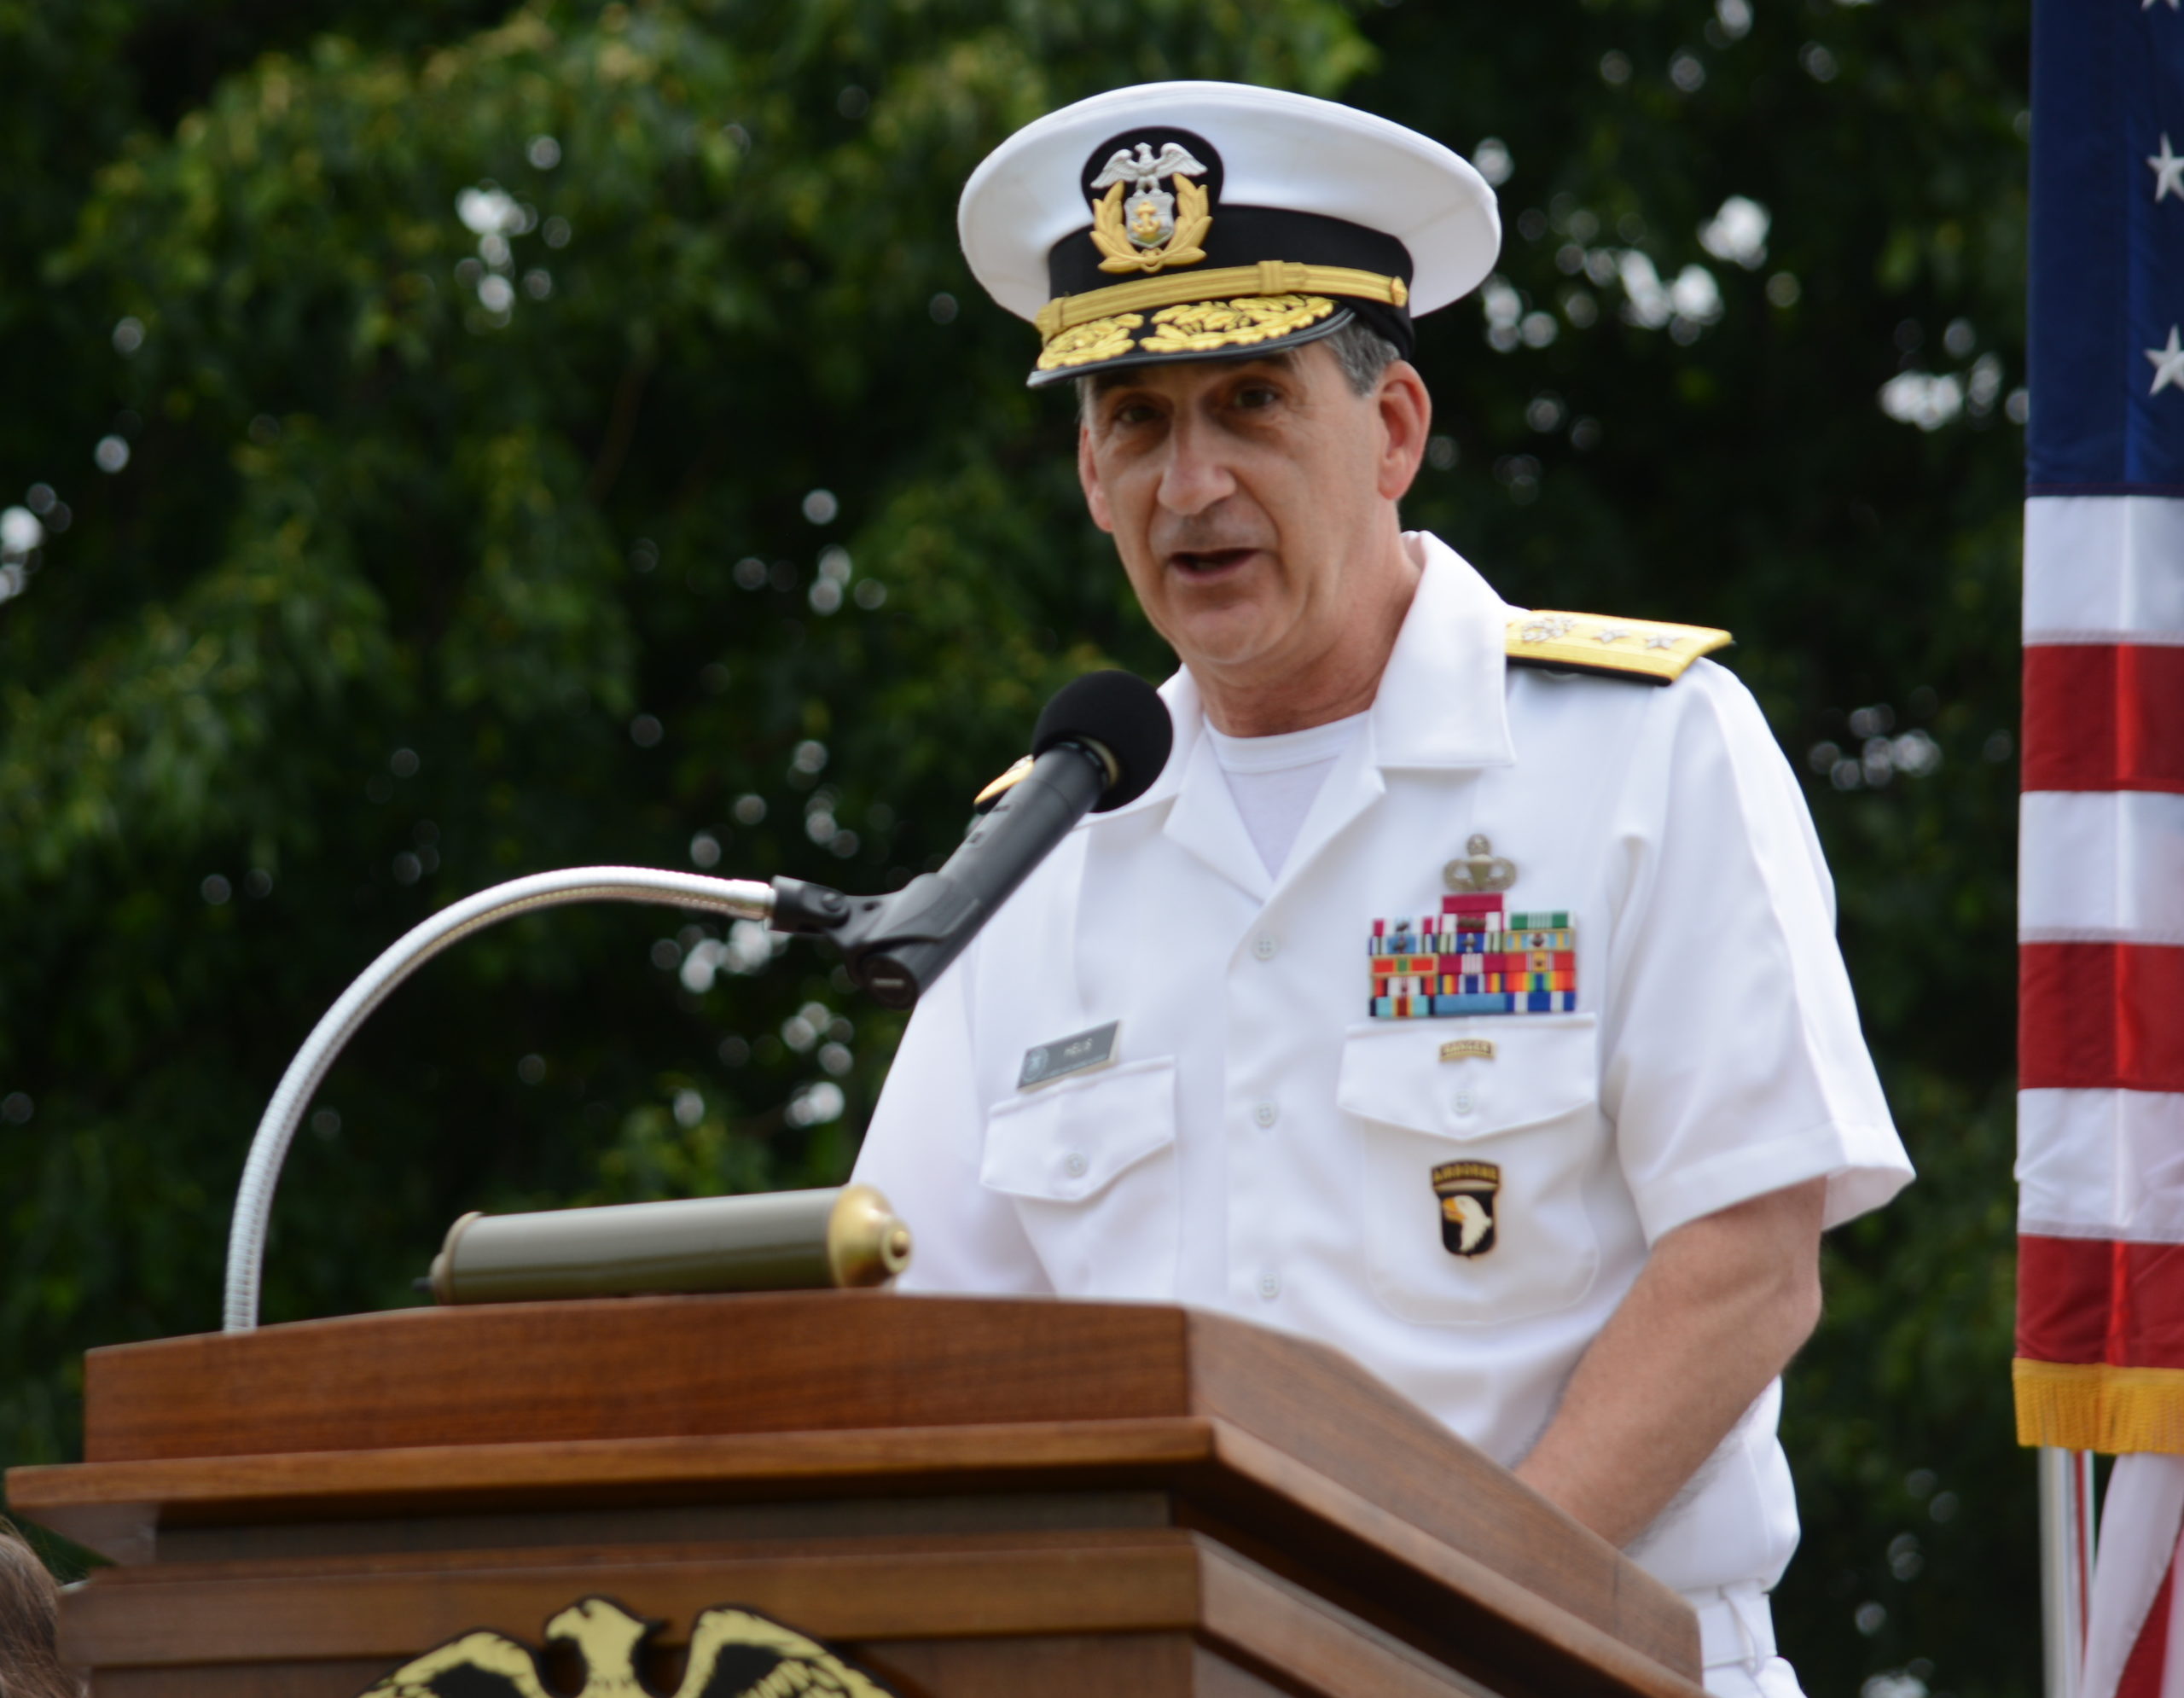 USSMA Superintendent Rear Adm. James Helis, seen here at a Fleet Week event back in May 2017, will be serving as a special assistant to the head of MARAD. (Photo by Janelle Clausen)